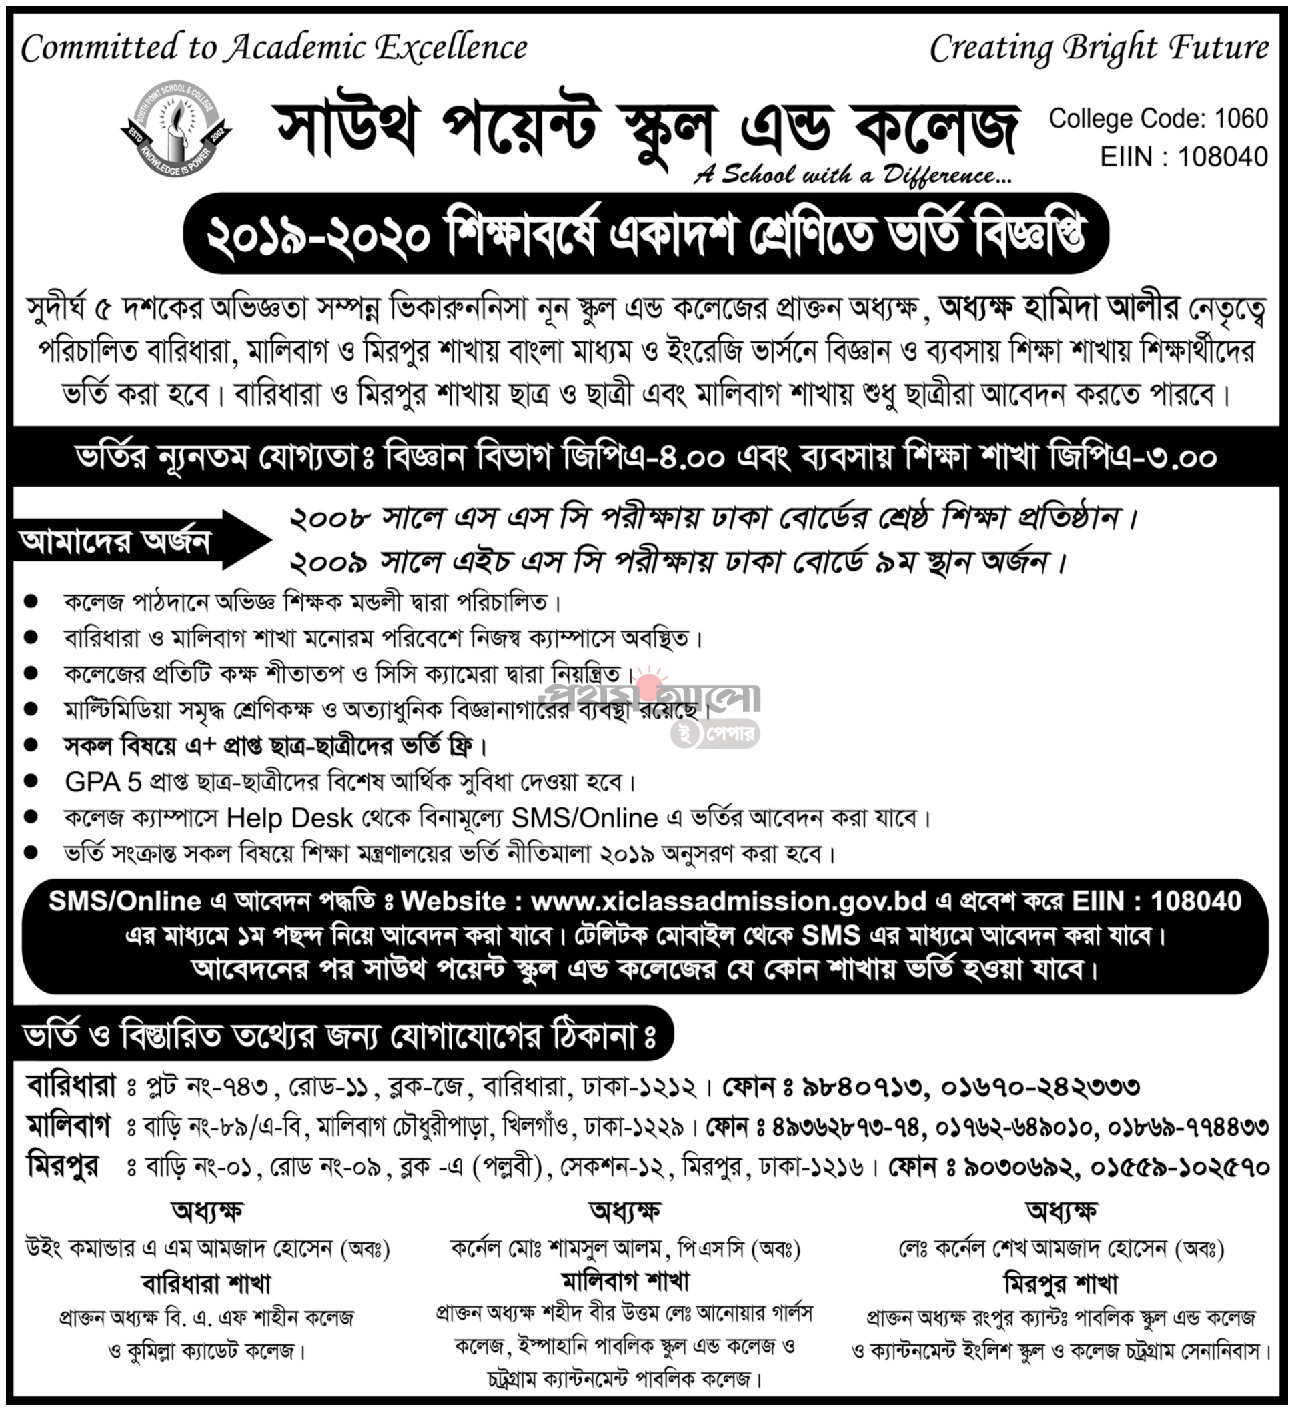 South Point School & College, Dhaka Admission Circular